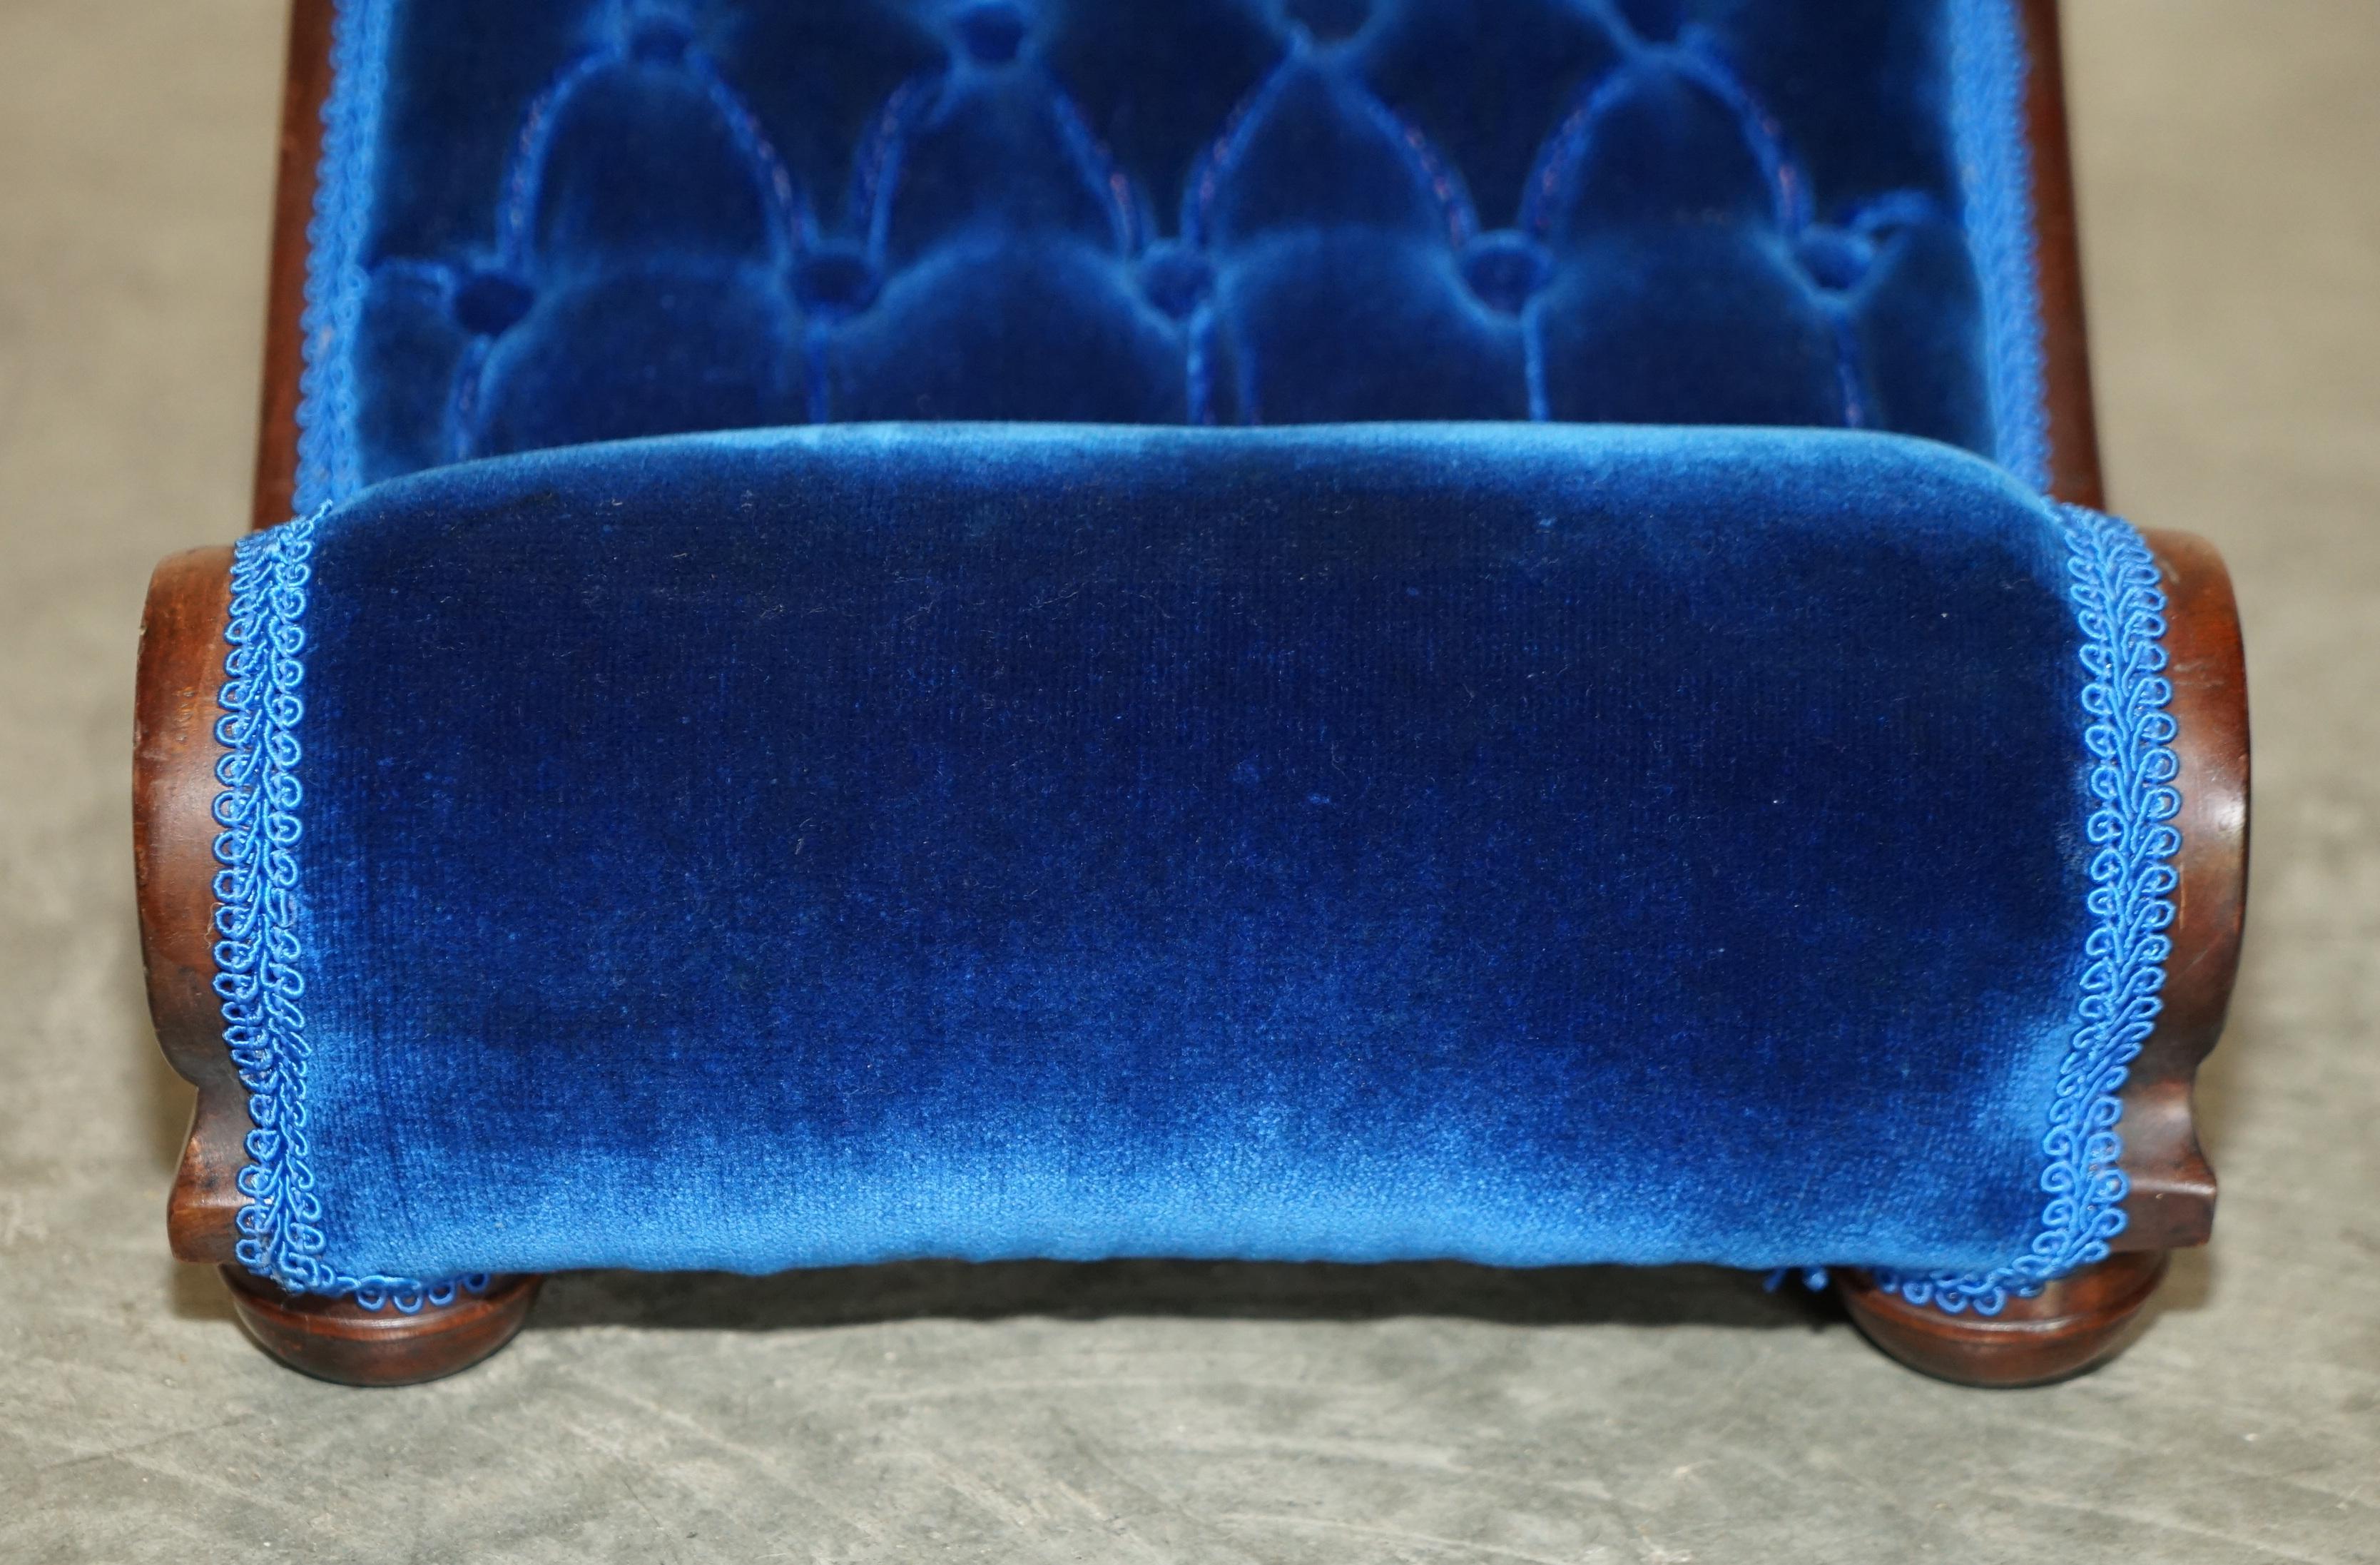 Velvet PAIR OF REGENCY BLUE ANTIQUE ViCTORIAN CHESTERFIELD TUFTED CURVED FOOTSTOOLS